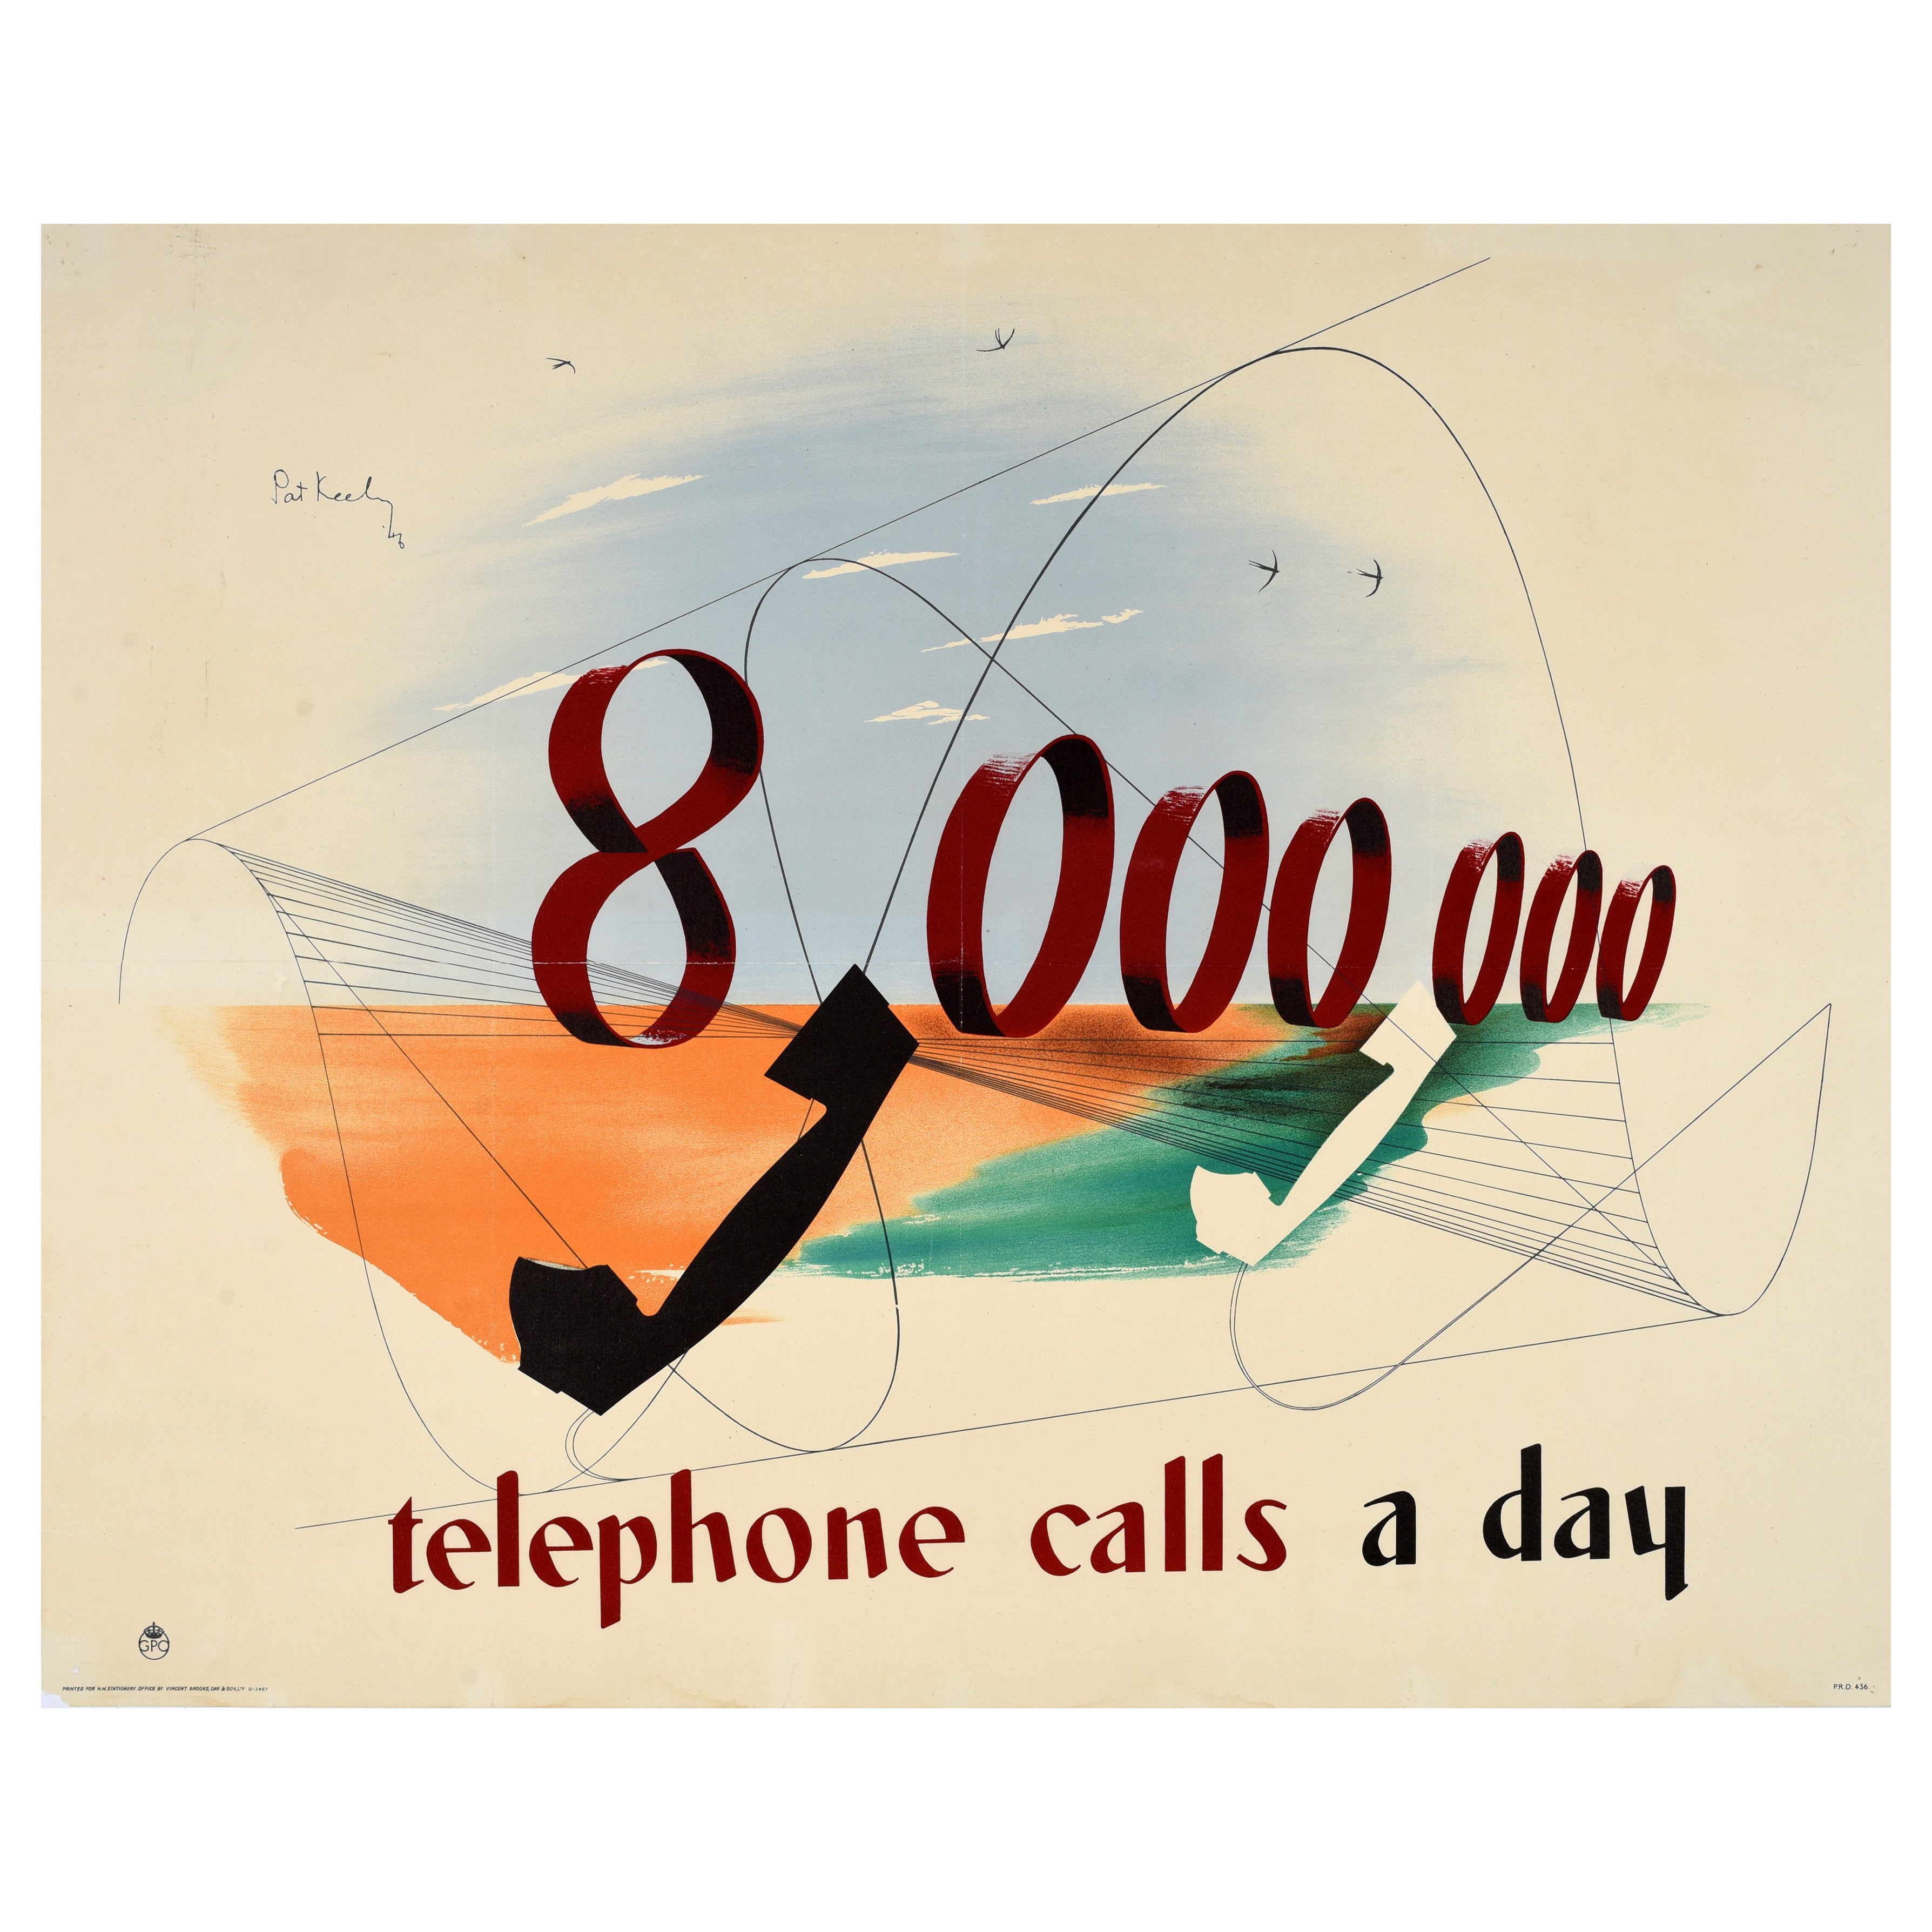 Original Vintage Poster GPO 8 Million Telephone Calls Modernism Pat Keely Post For Sale